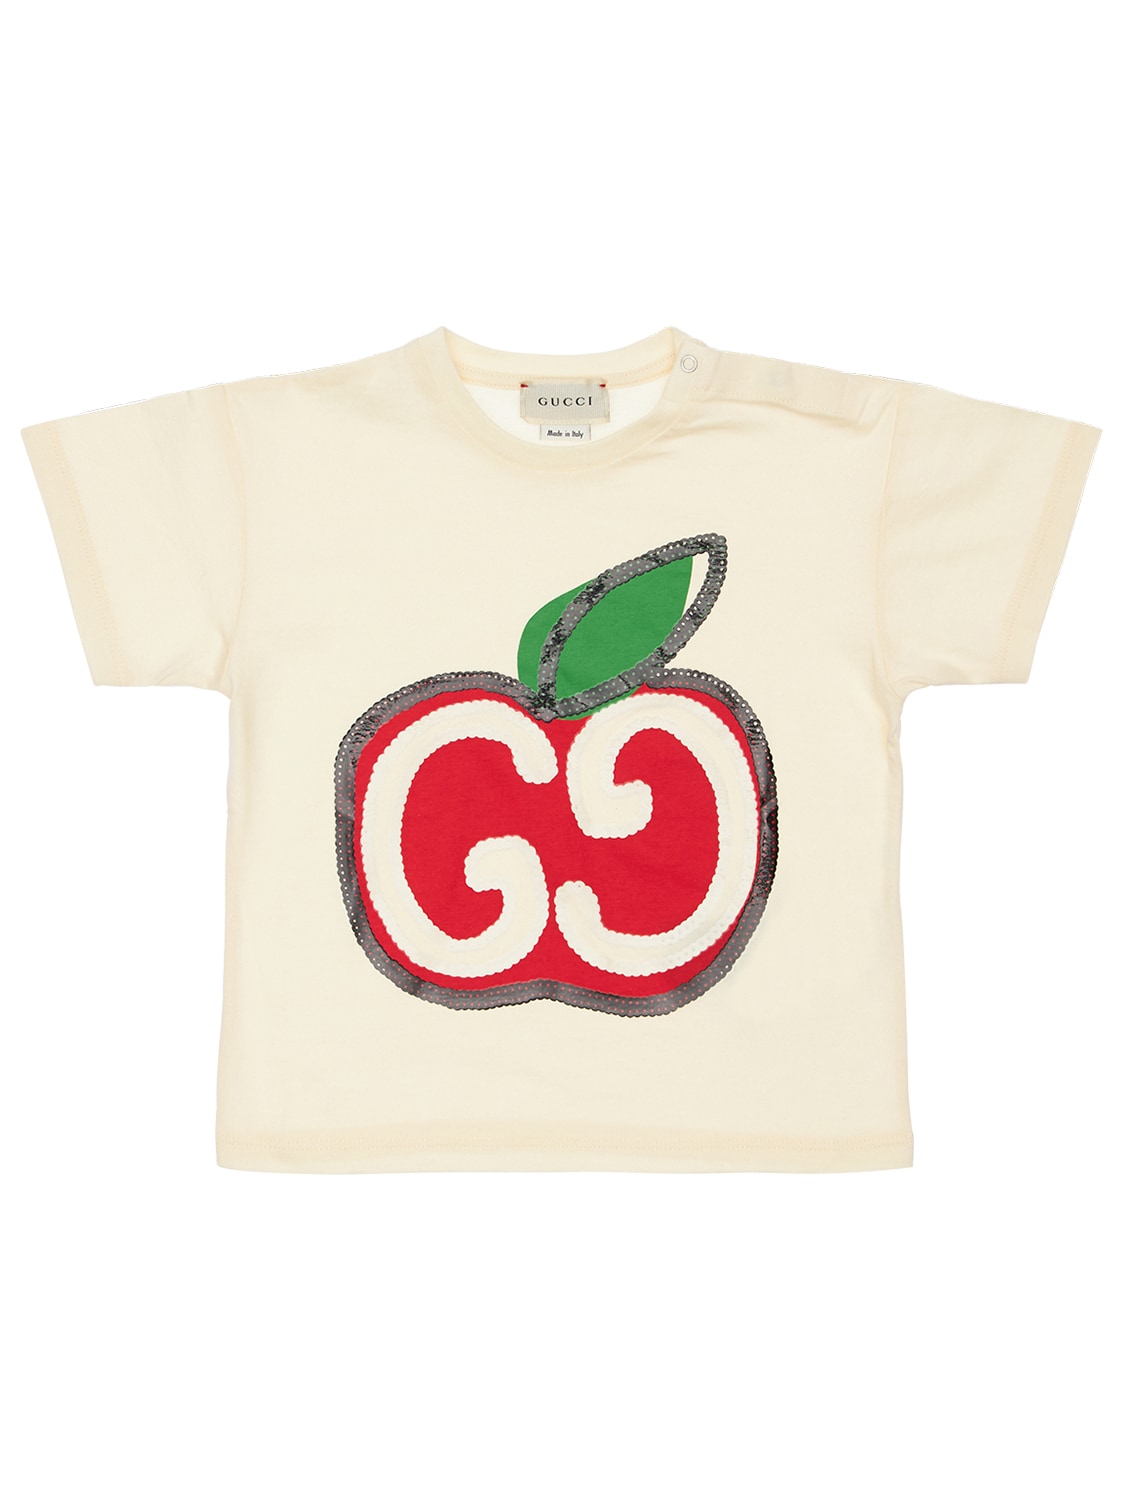 Gucci Babies' Printed Cotton Jersey T-shirt In White